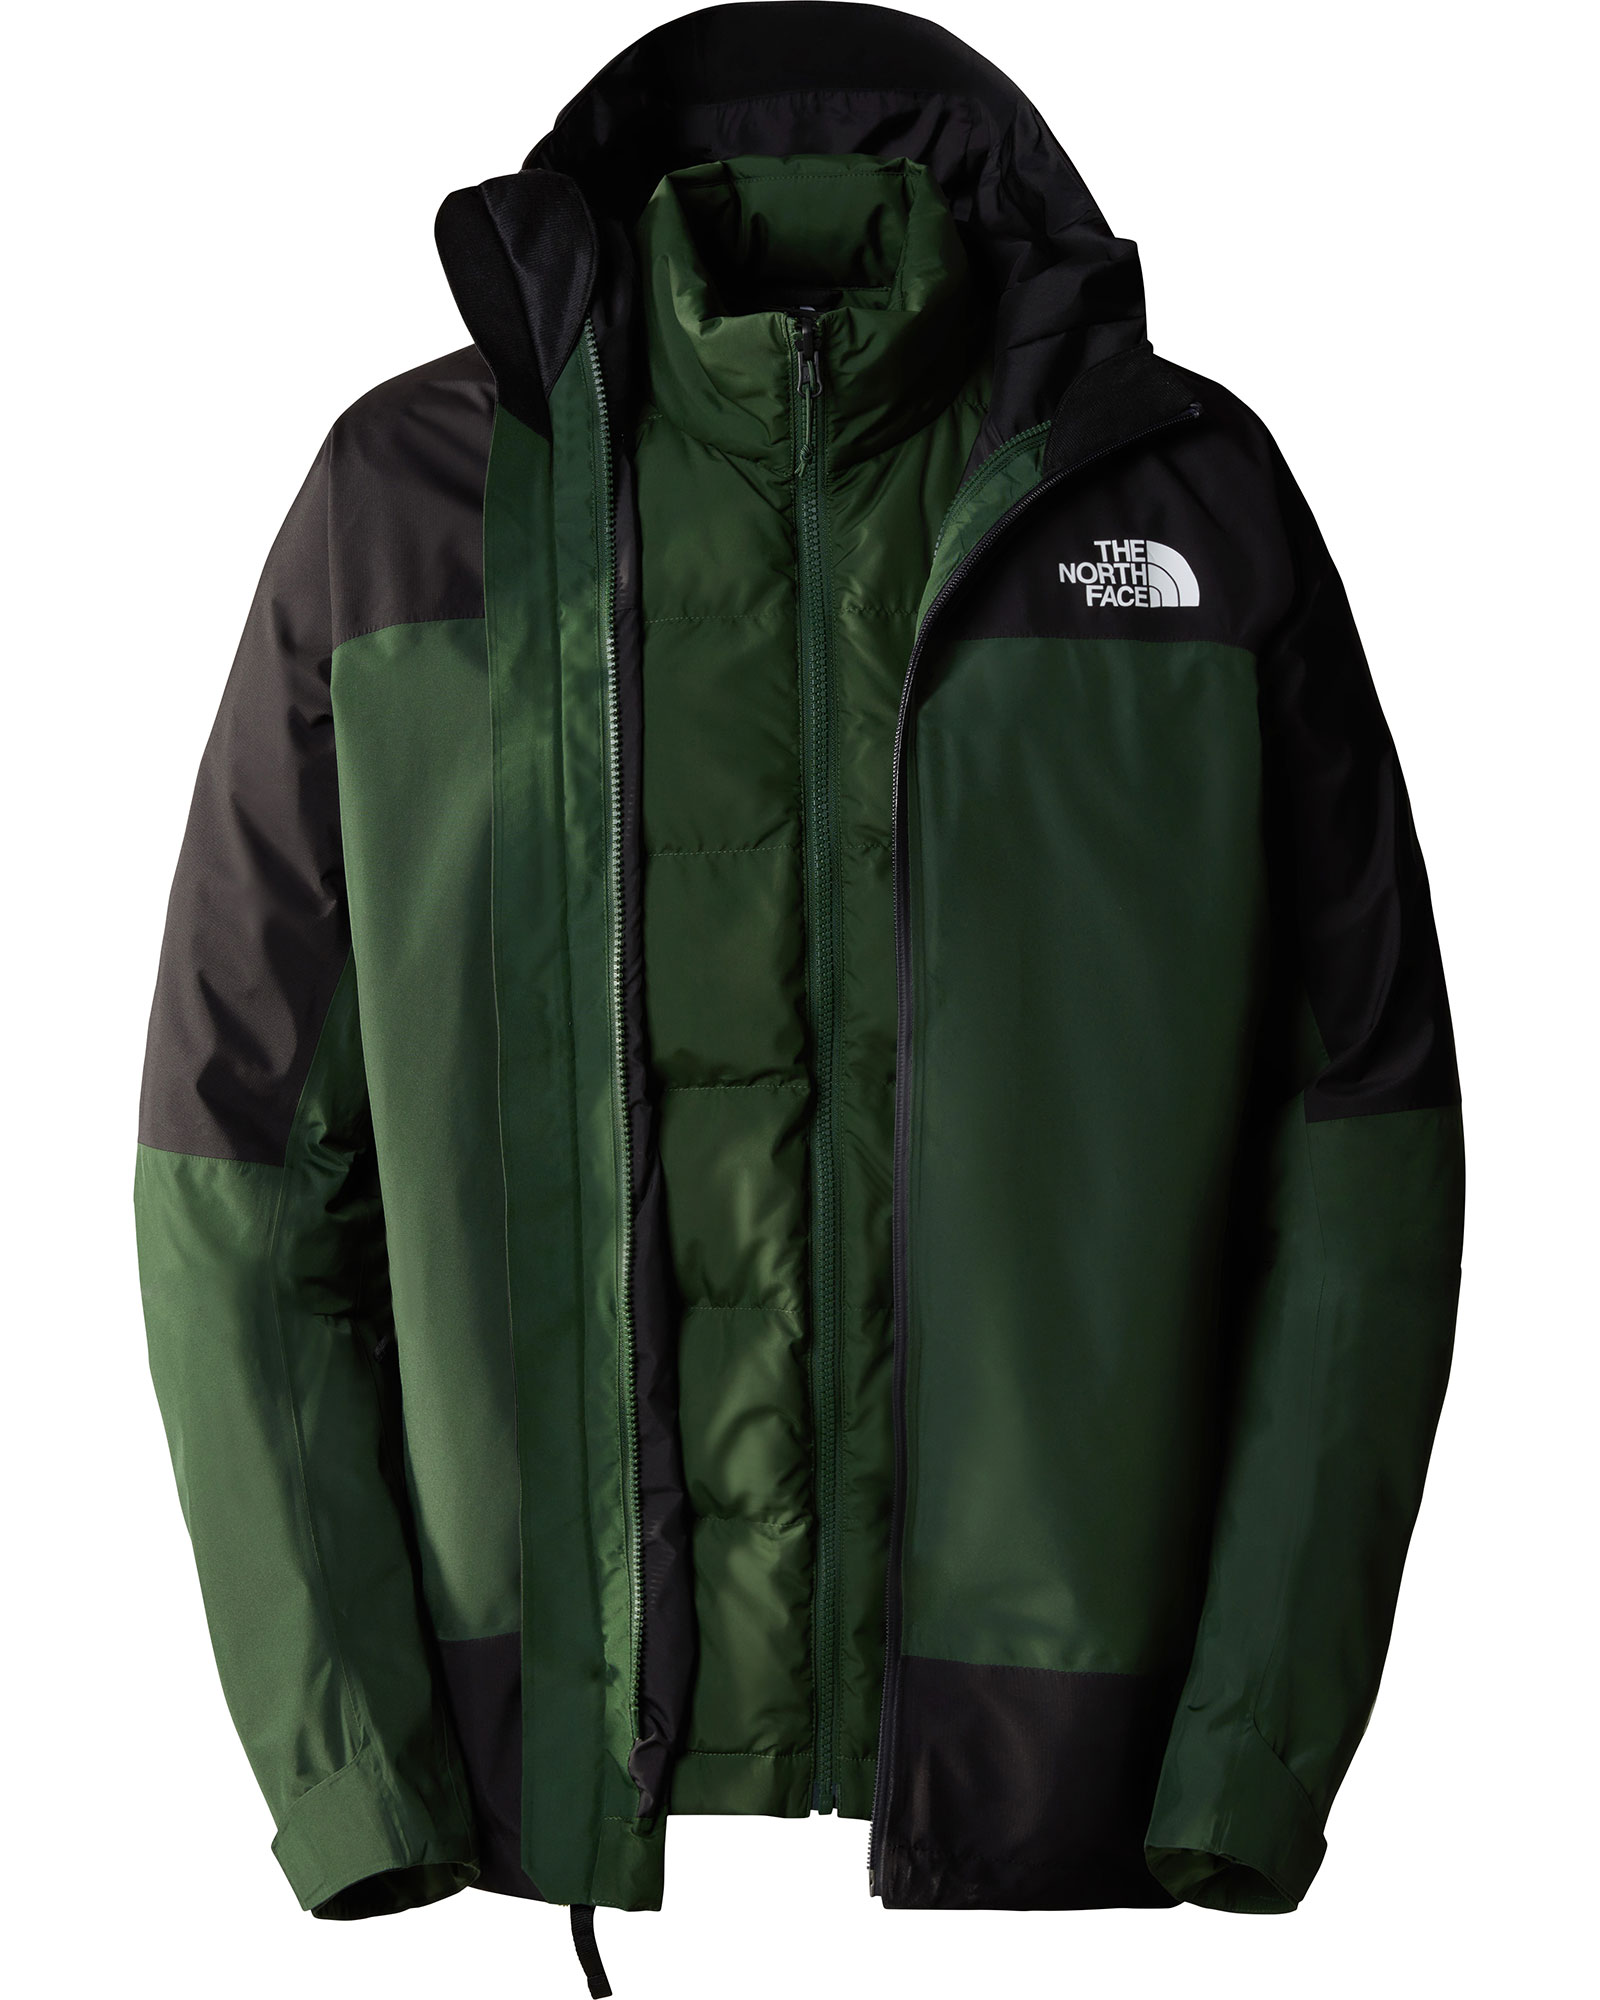 The North Face Men’s Mountain Light Triclimate GORE TEX Jacket - Pine Needle-TNF Black S